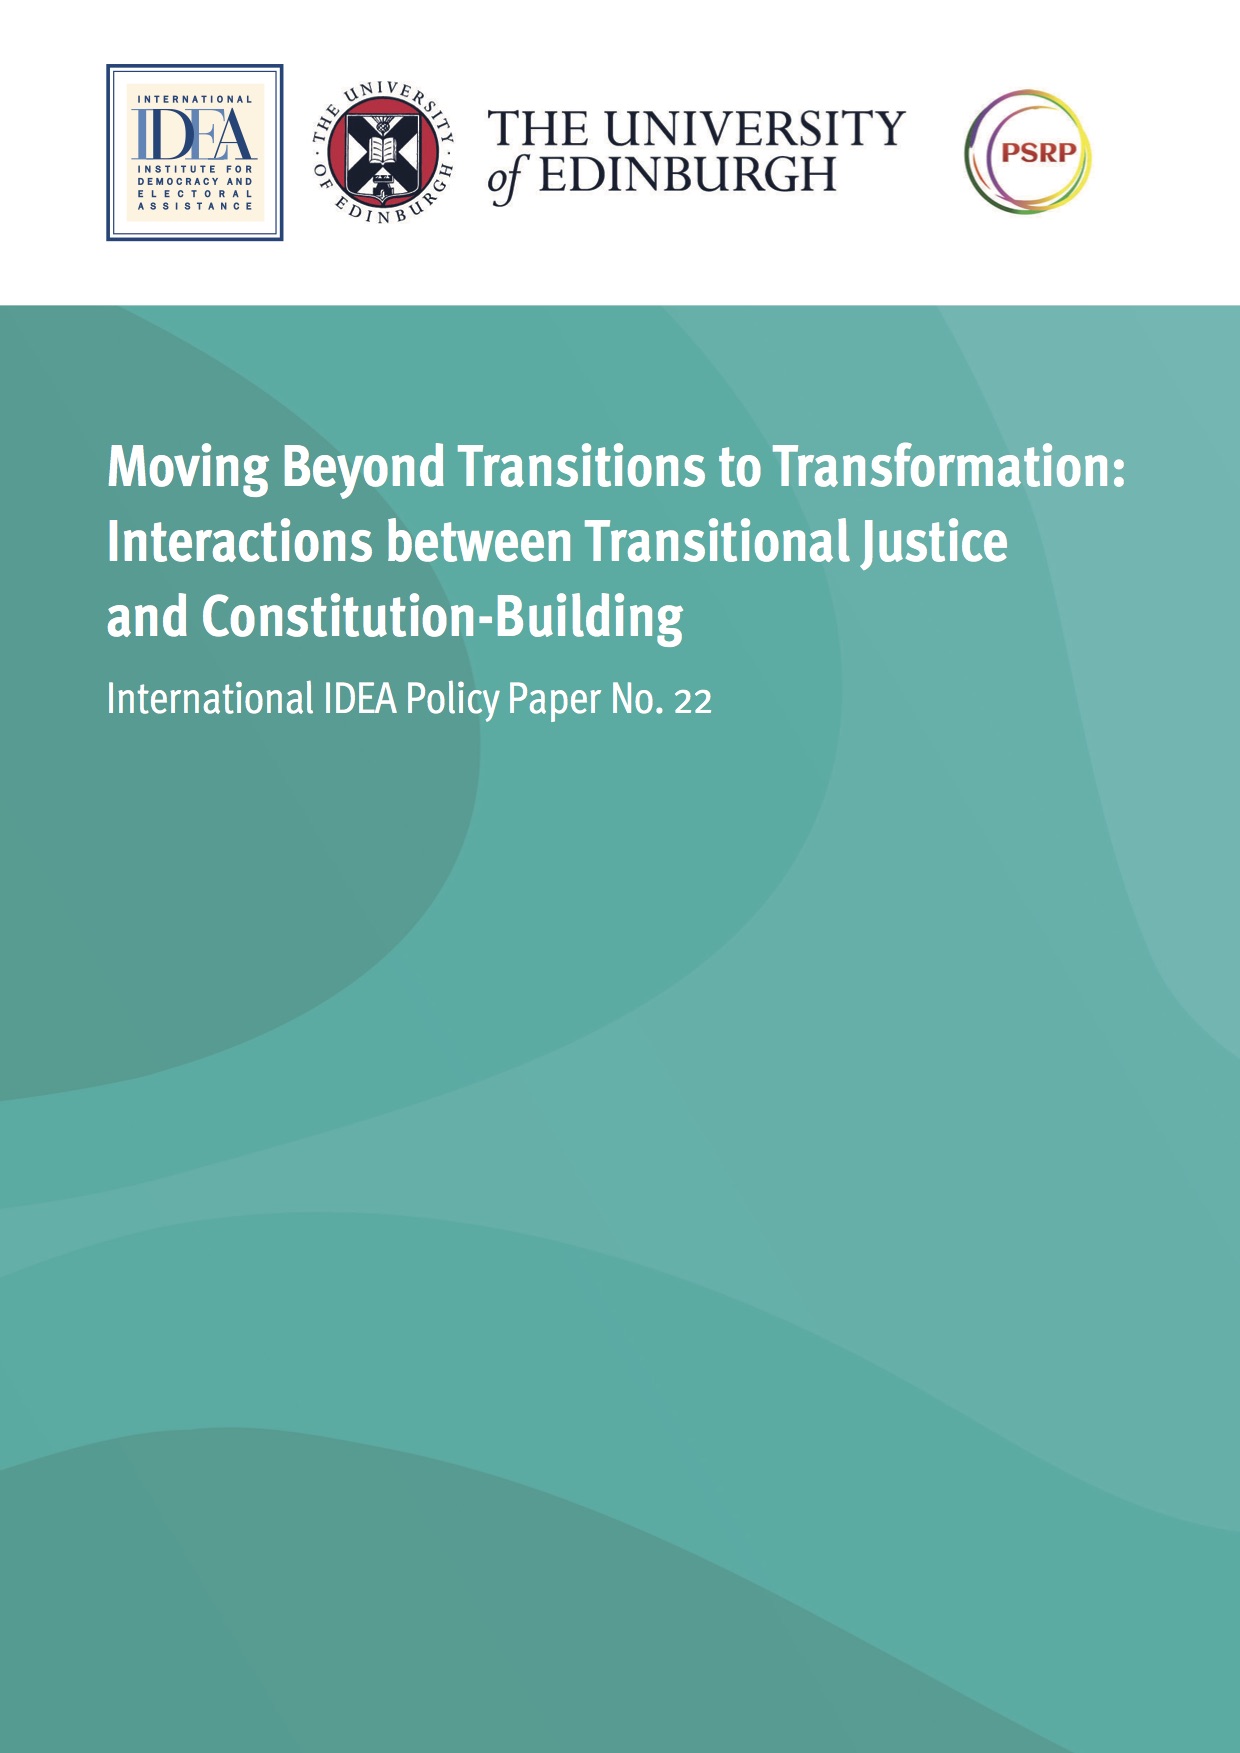 Moving Beyond Transitions to Transformation: Interactions Between Transitional Justice and Constitution-Building